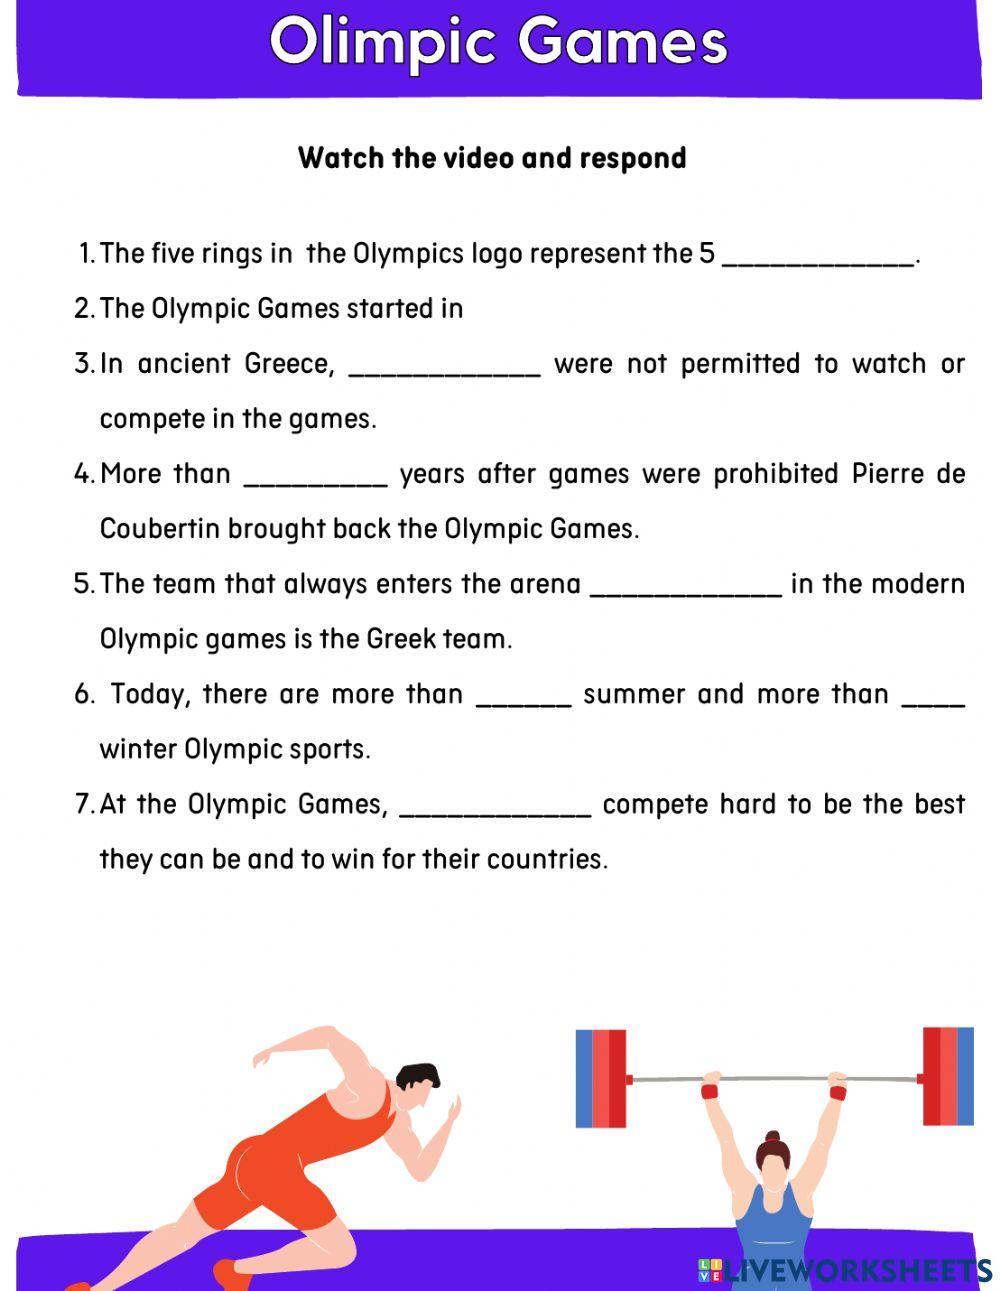 Olympics 2020 are still scheduled. Good News. Now for some trivia! Do you  think the five